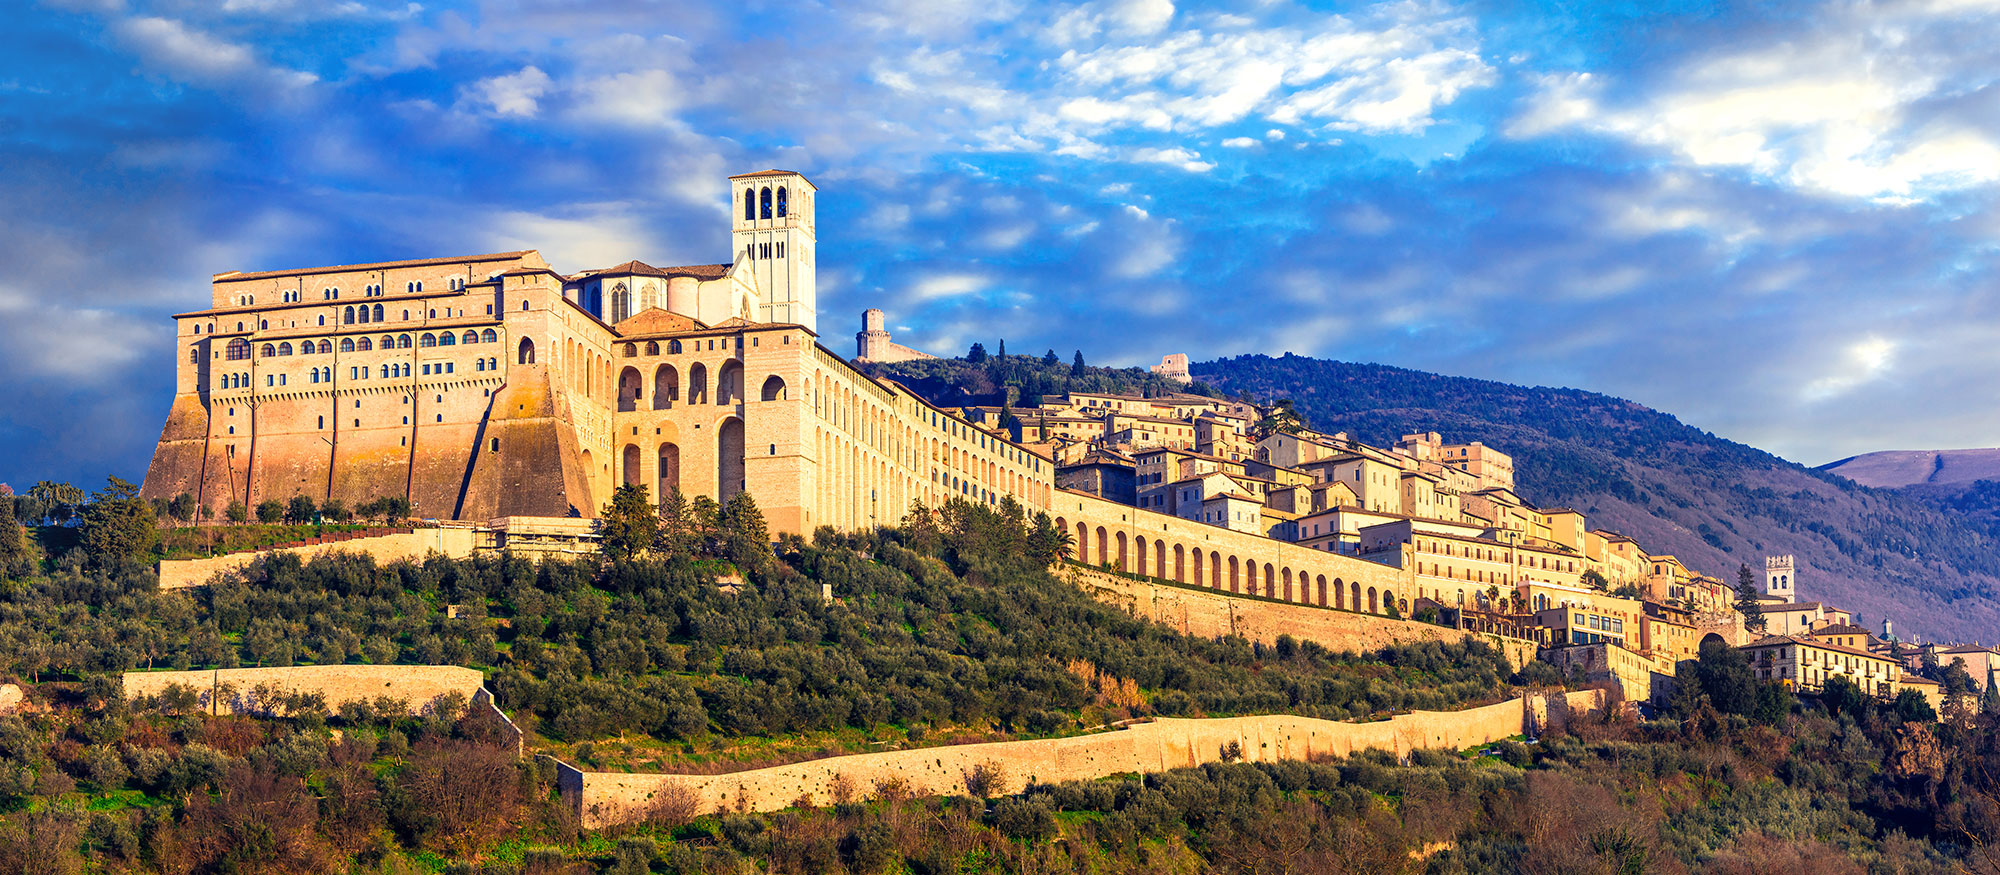 https://www.atlantivacations.com/wp-content/uploads/2022/04/medieval-Assisi-town-religious-center-of-Umbria.jpg